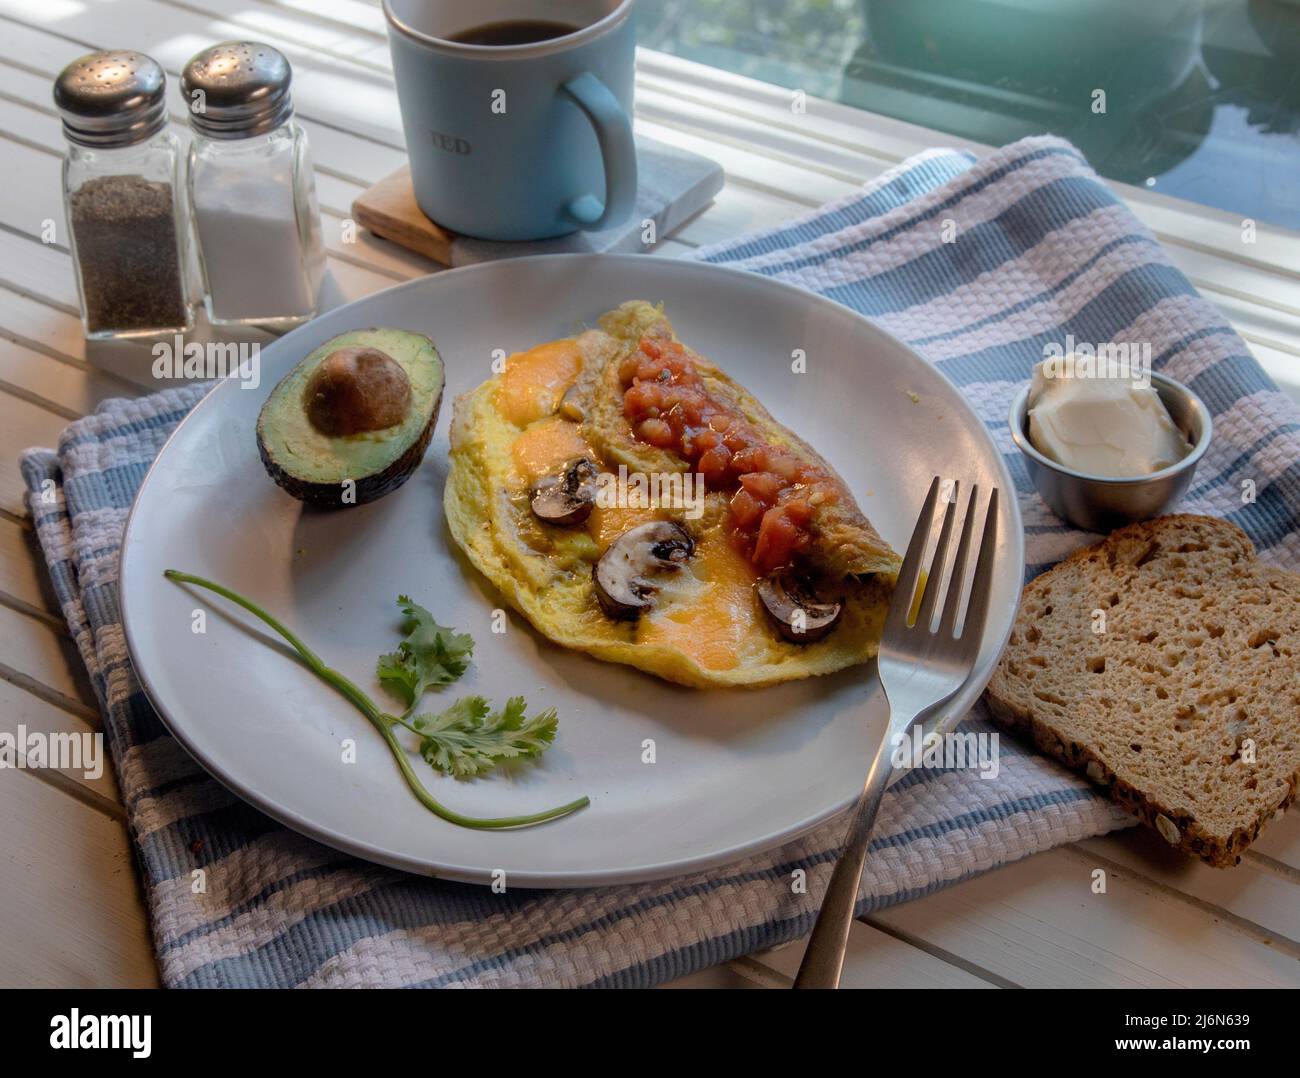 Top View of mushroom and cheese omelette on white natural wood table. Stock Photo